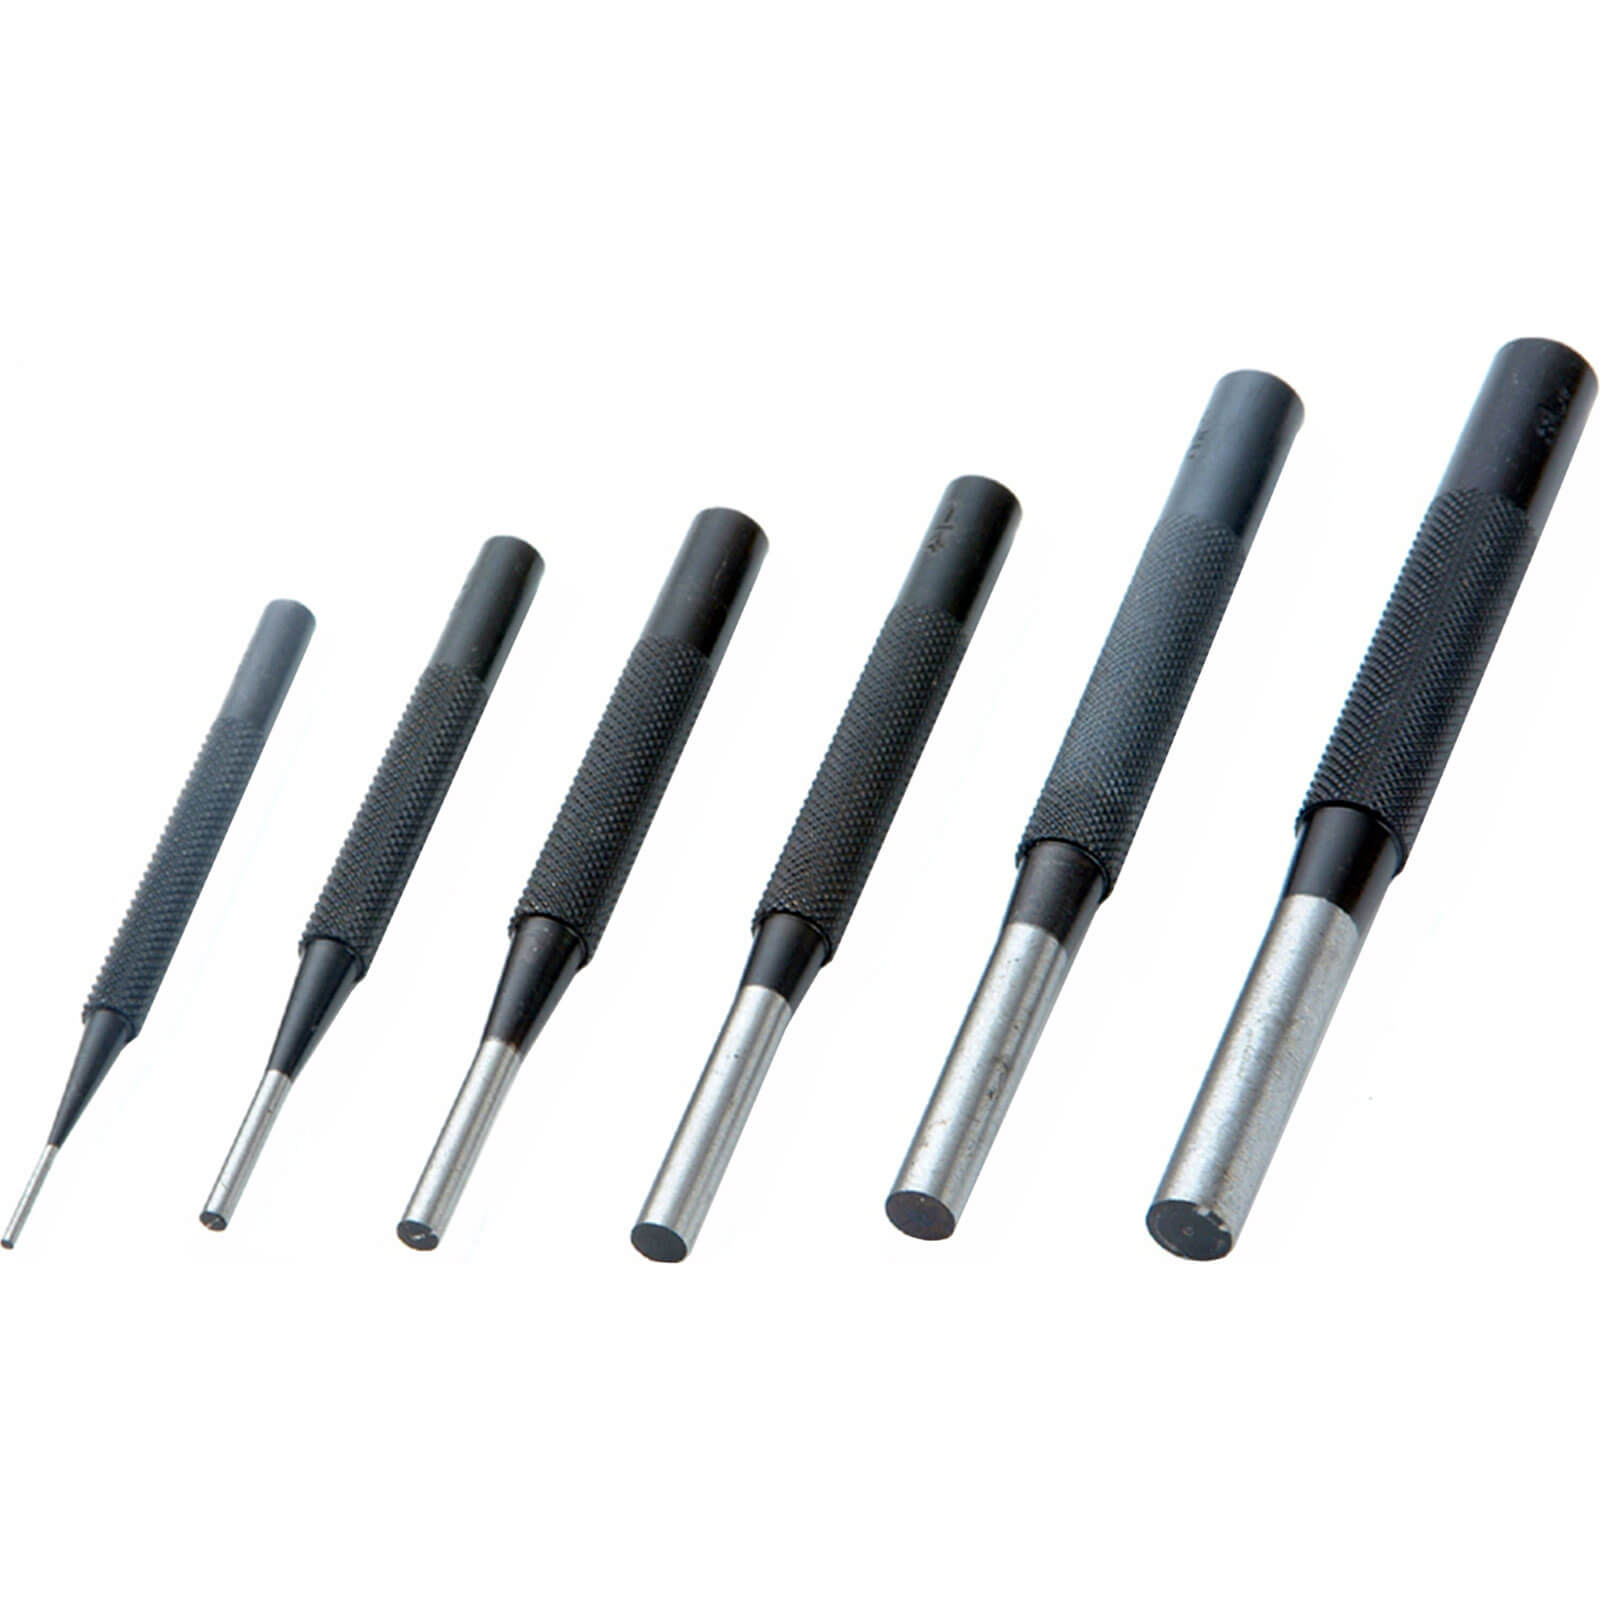 Image of Priory 6 Piece Parallel Pin Punch Set